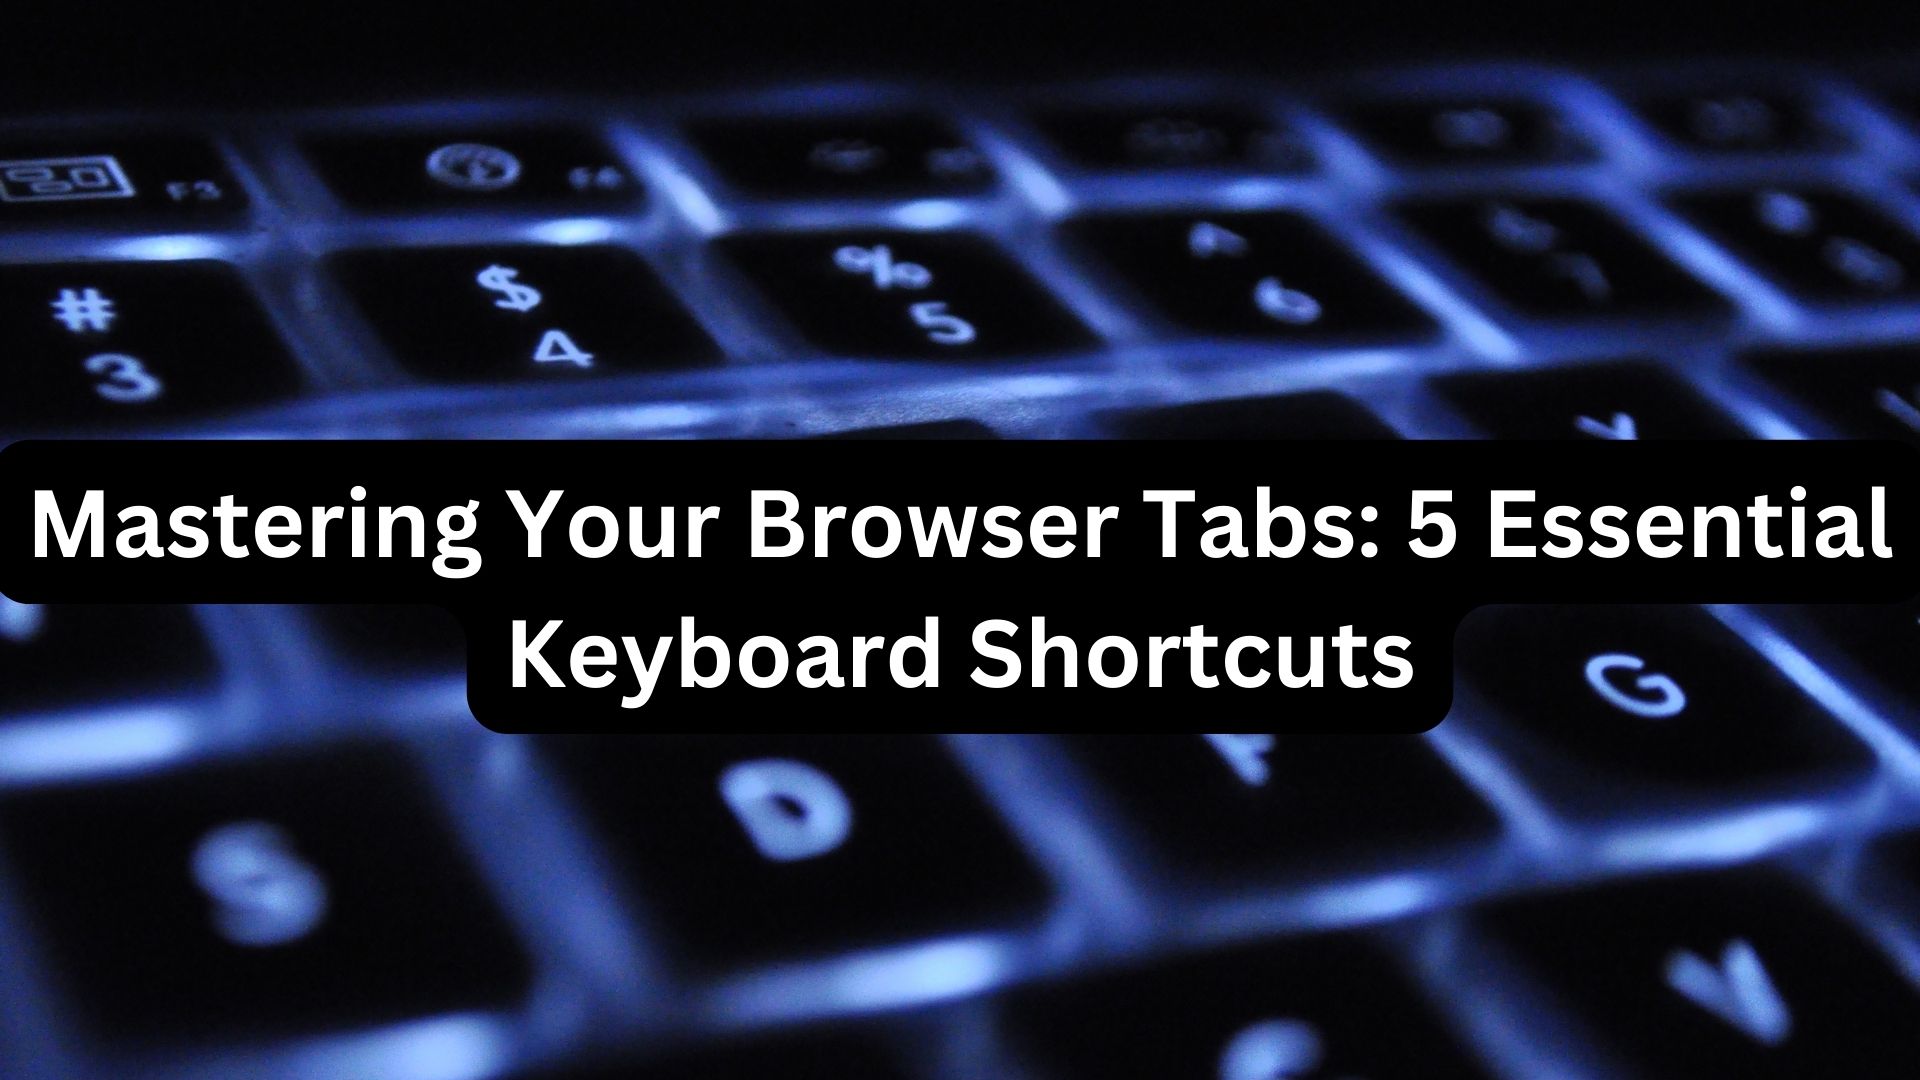 Mastering Your Browser Tabs: 5 Essential Keyboard Shortcuts